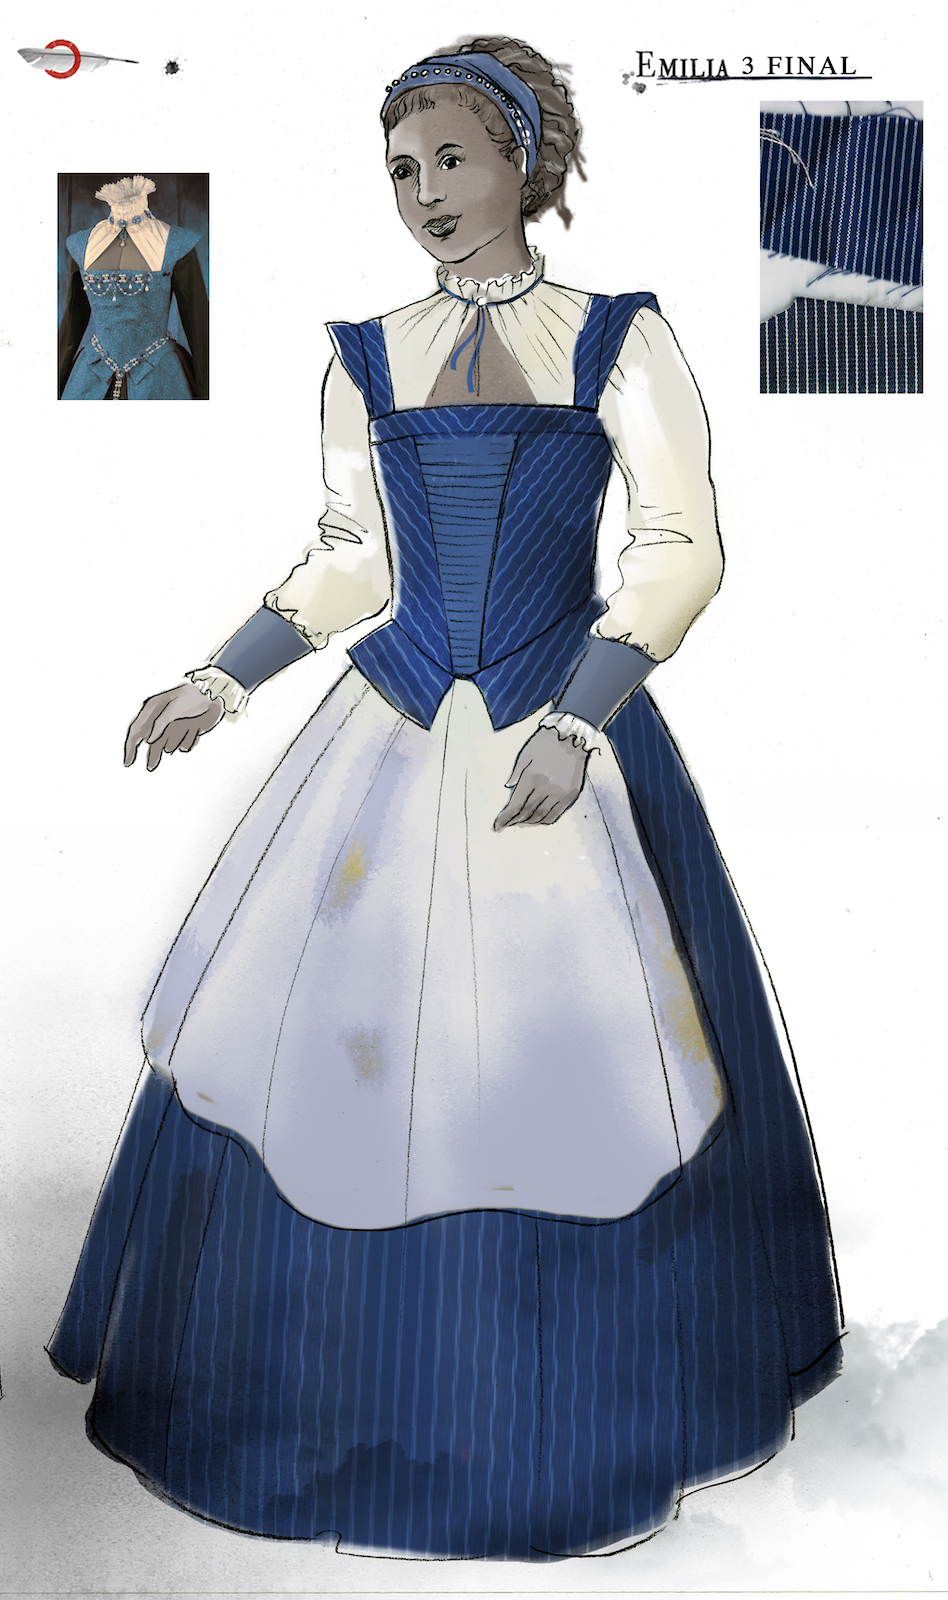 A costume sketch of a blue and white Elizabethan dress